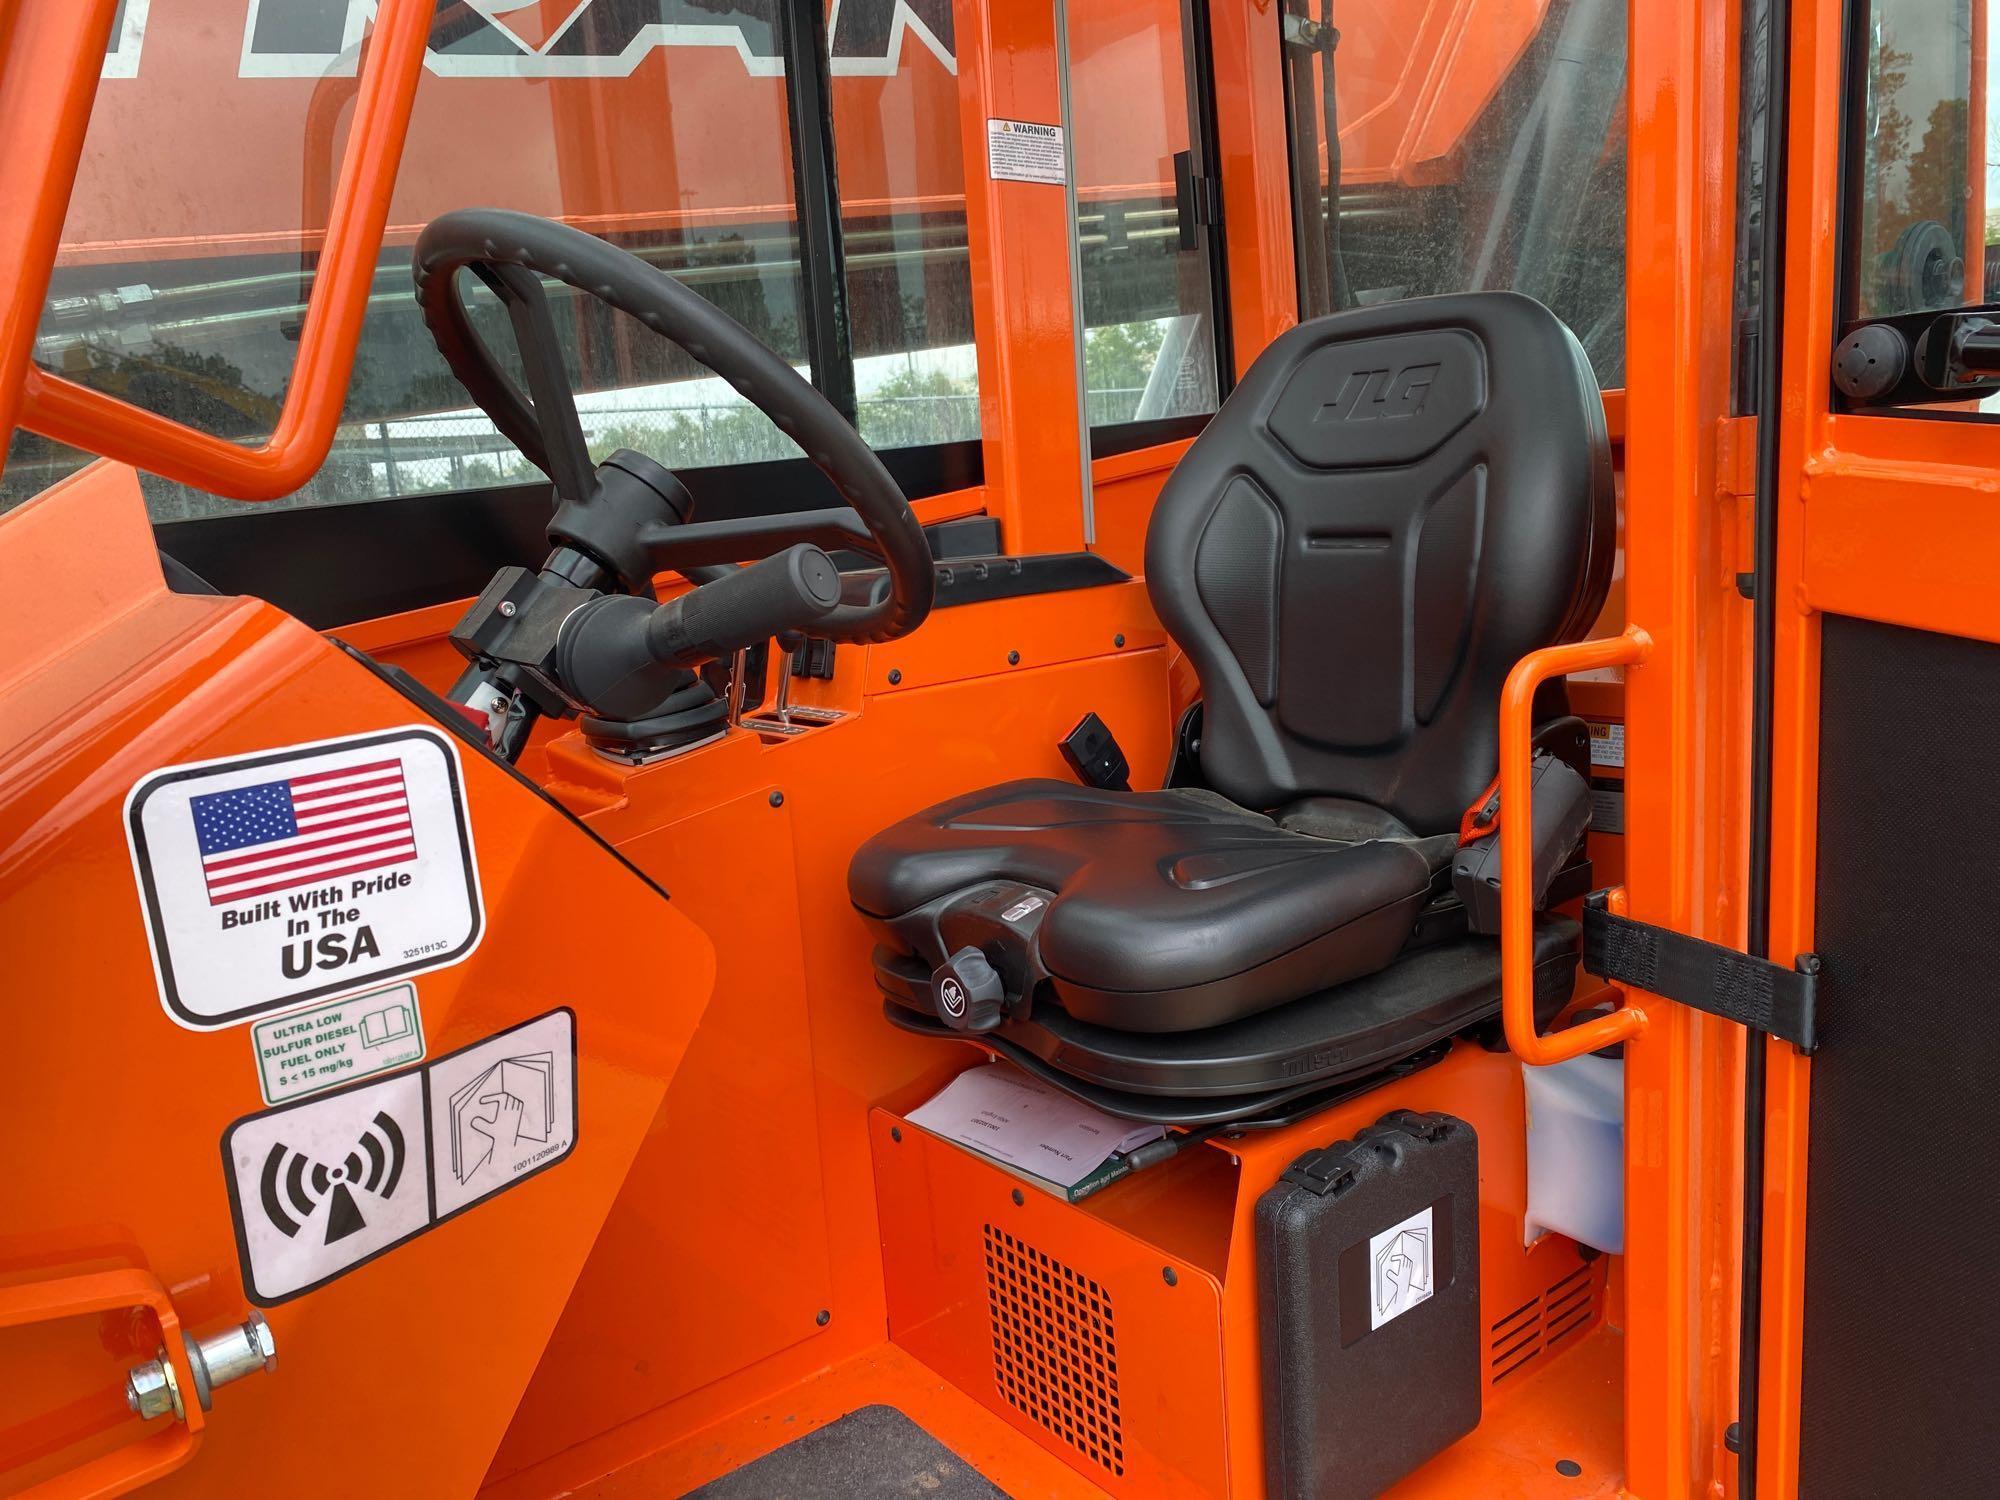 NEW UNUSED SKYTRAK 10042 TELESCOPIC FORKLIFT SN-129481 4x4, powered by diesel engine, 74hp, equipped